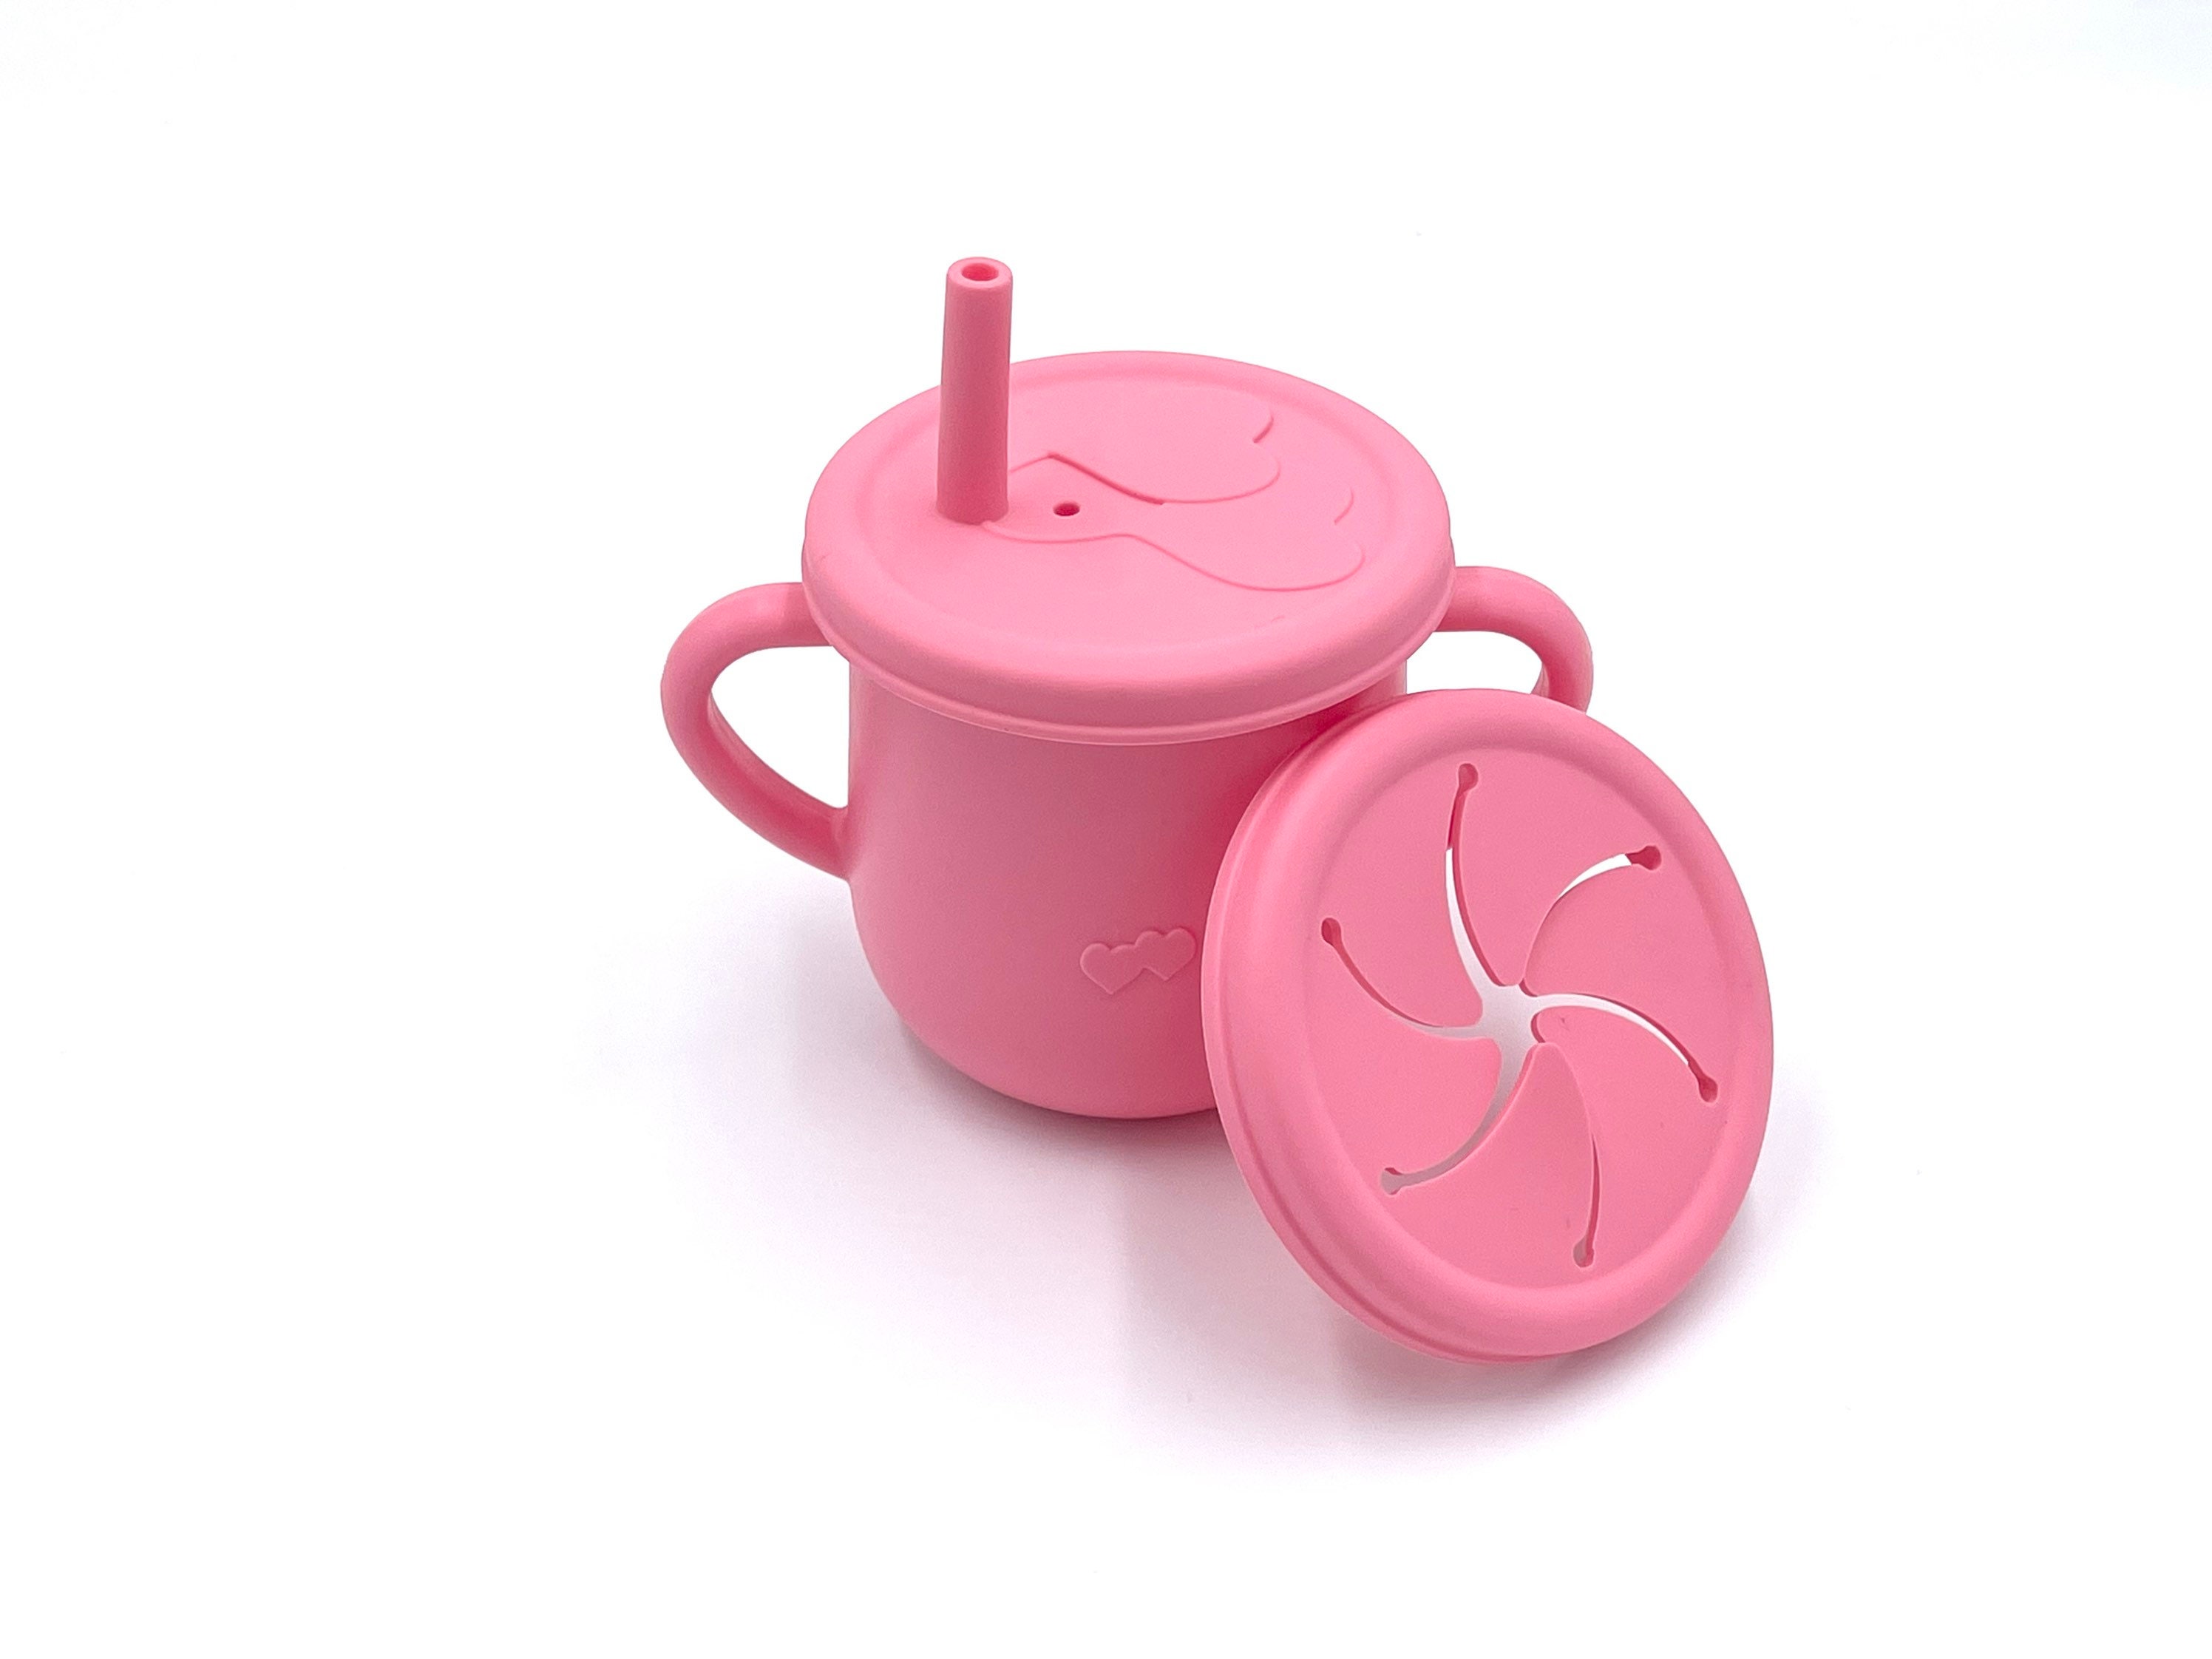 Silicone Snack Cups,Kids Snack Containers No Spill,Treat Holders with Handle Dust Proof Lid,Dishwasher Safe and BPA Free, Pink